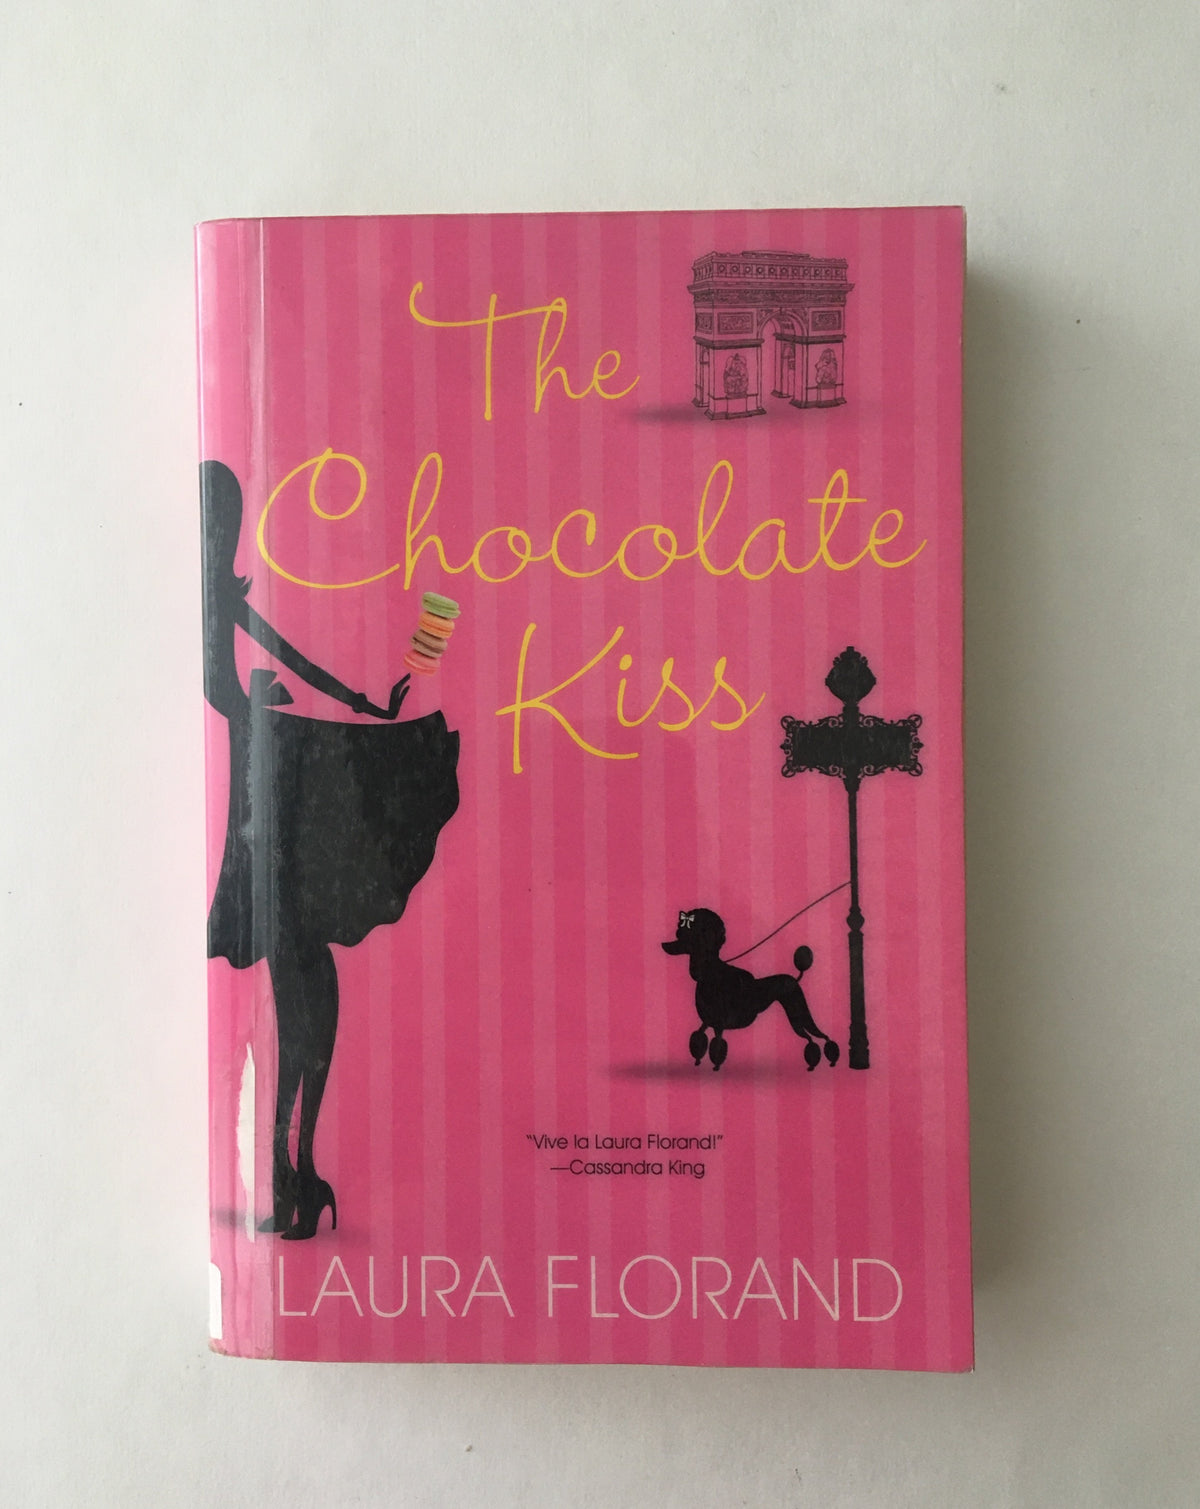 The Chocolate Kiss by Laura Florand